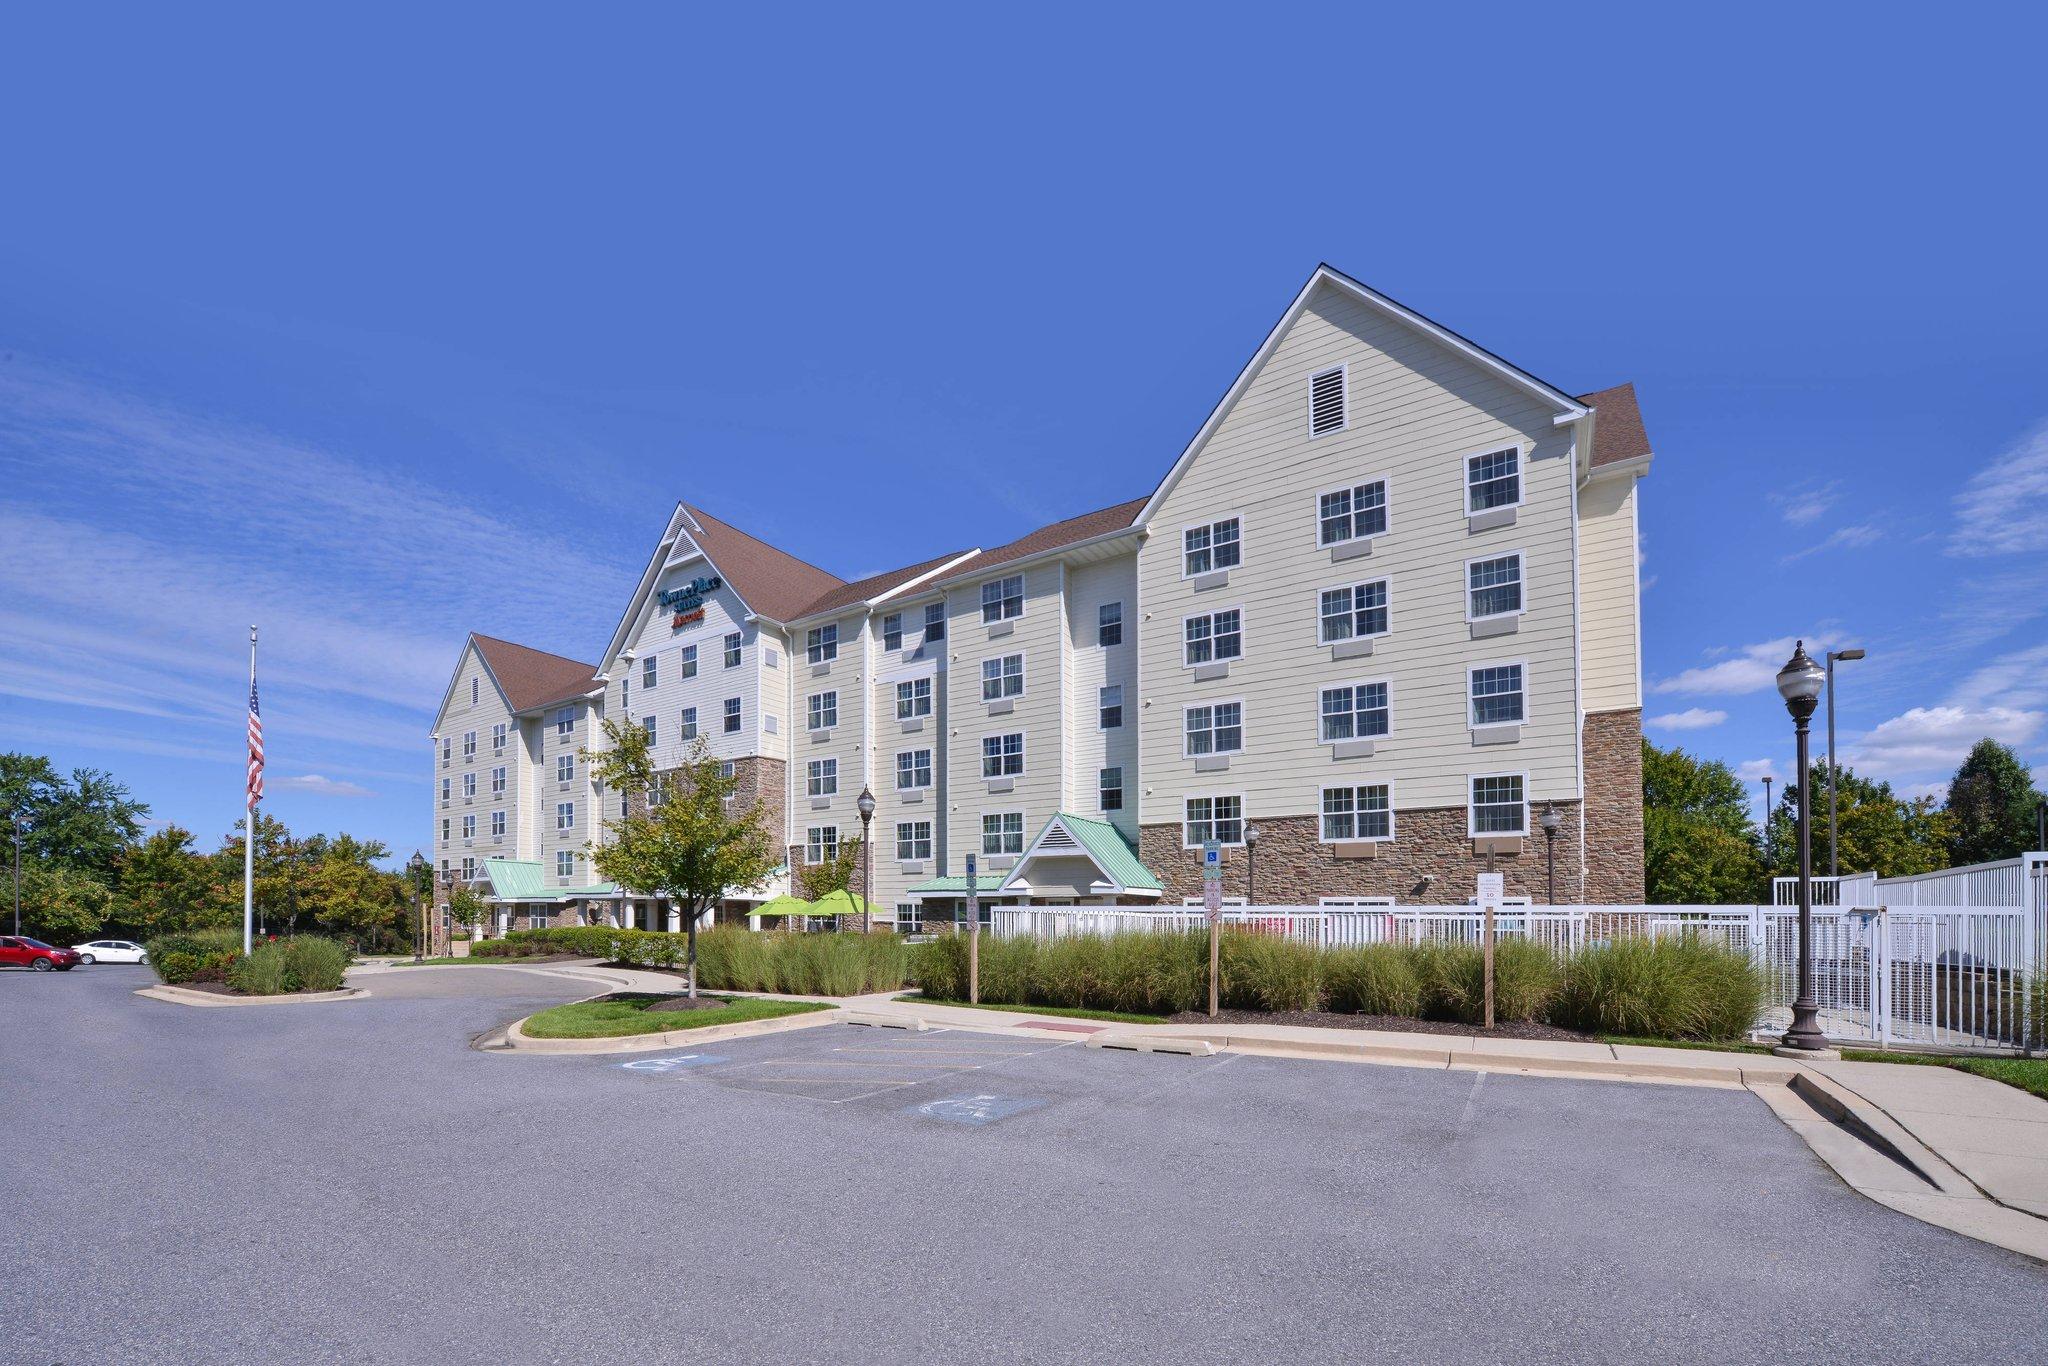 TownePlace Suites Arundel Mills BWI Airport in Hanover, MD